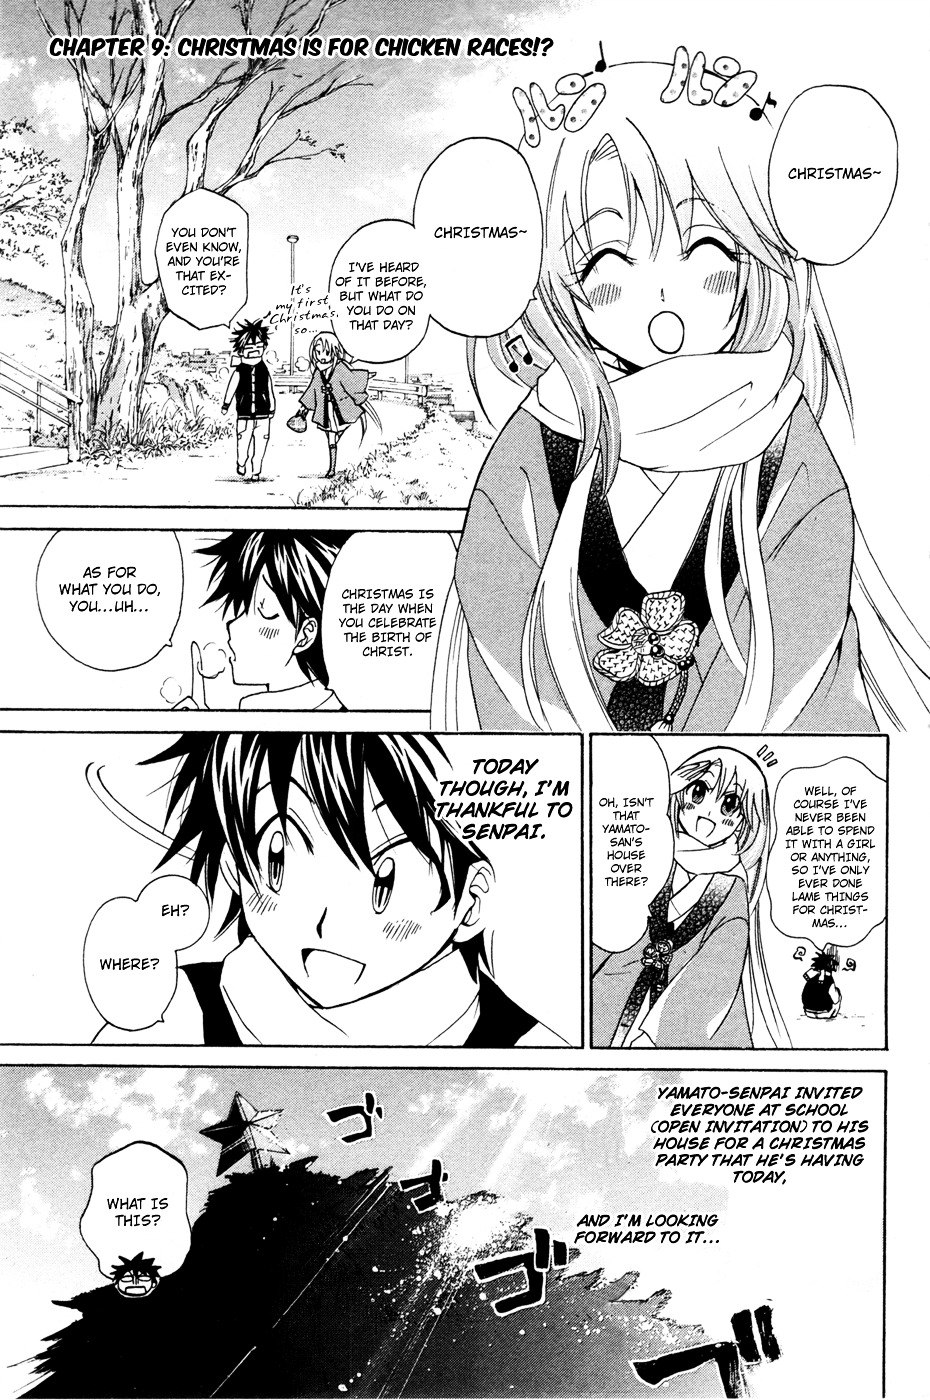 Kitsune No Yomeiri Chapter 9 : Christmas Is For Chicken Races!? - Picture 2